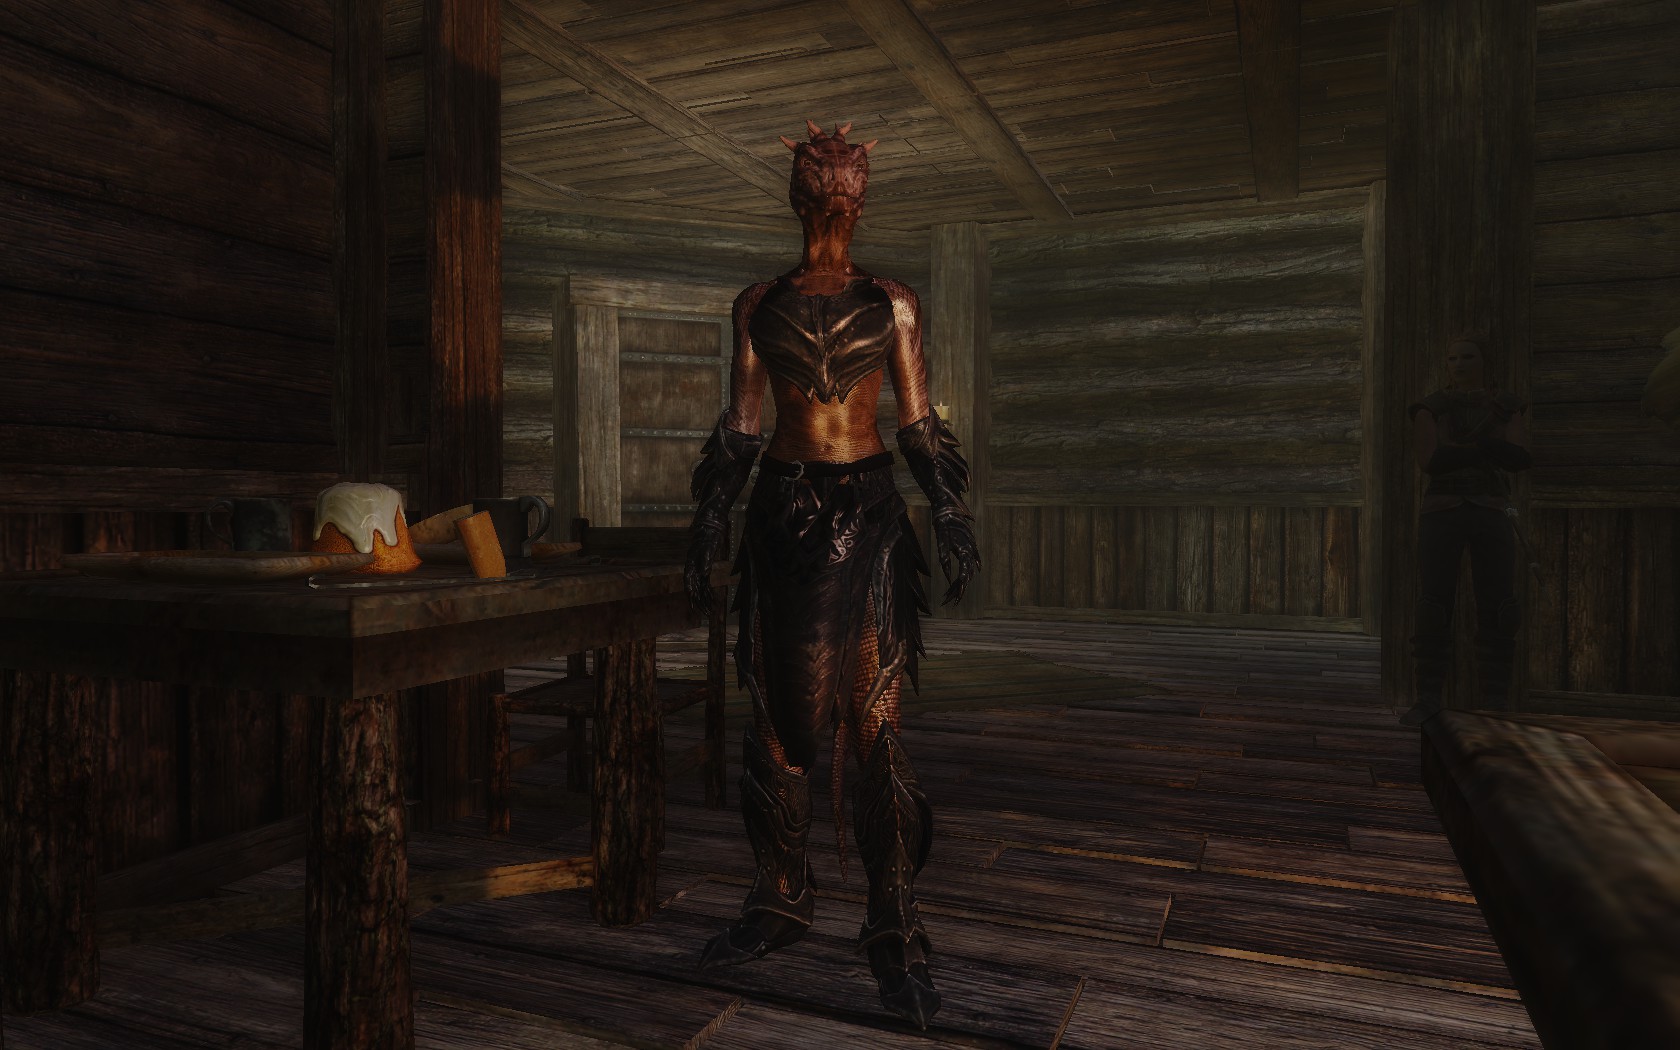 AmA - Argonian Mercenary Armor - With Armored Tail. 